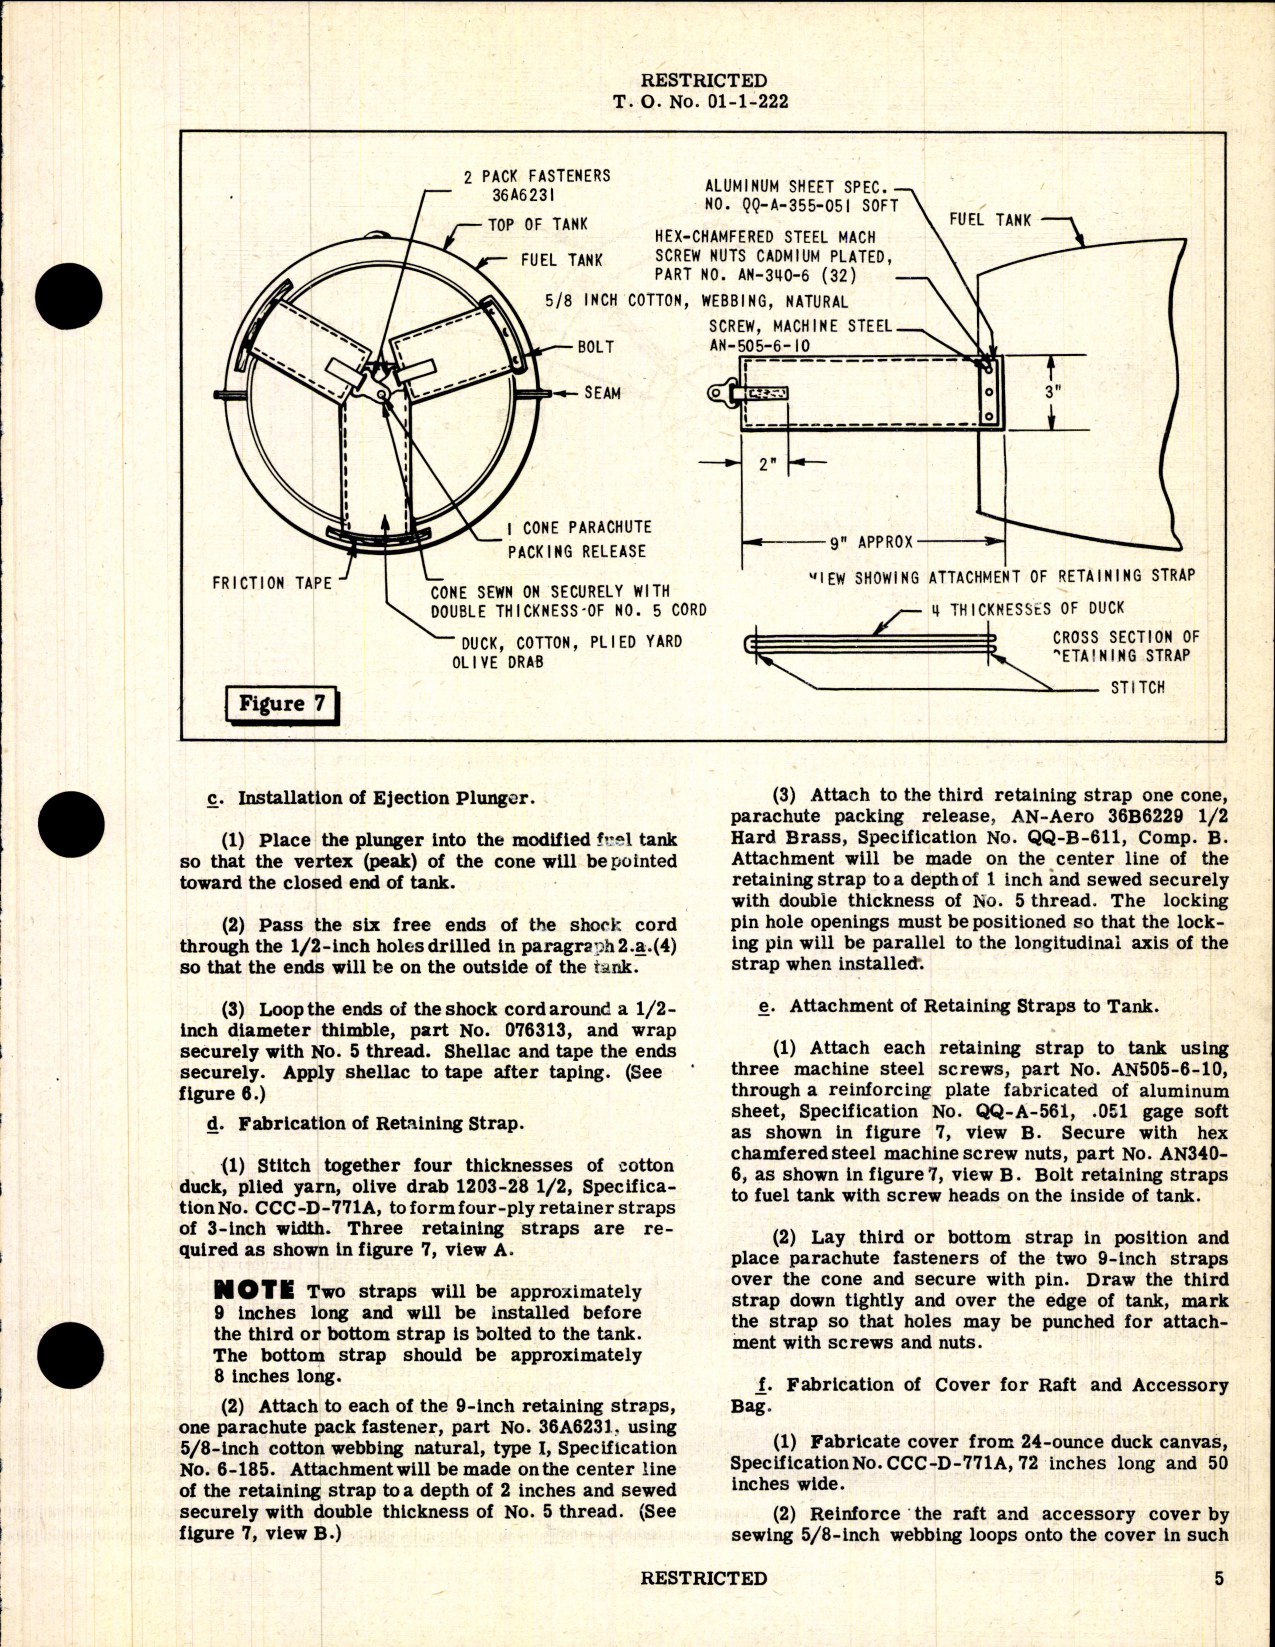 Sample page 5 from AirCorps Library document: Aircraft and Maintenance Parts; Conversion of 75 Gallon Auxiliary Metal Fuel Tank into fighter Rescue Gear